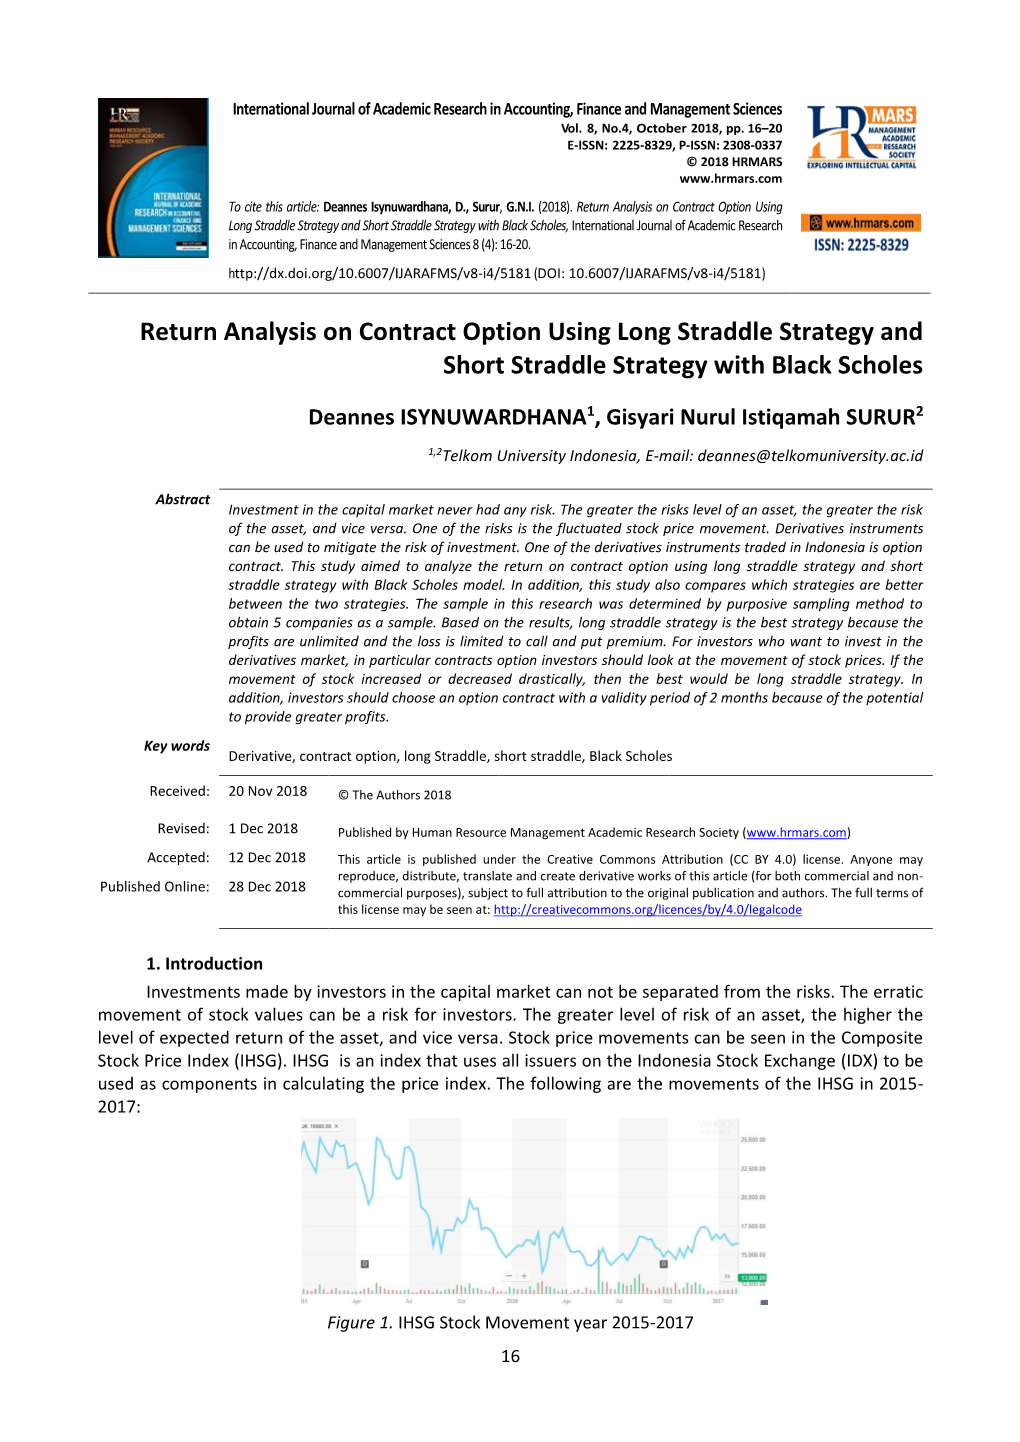 Return Analysis on Contract Option Using Long Straddle Strategy and Short Straddle Strategy with Black Scholes